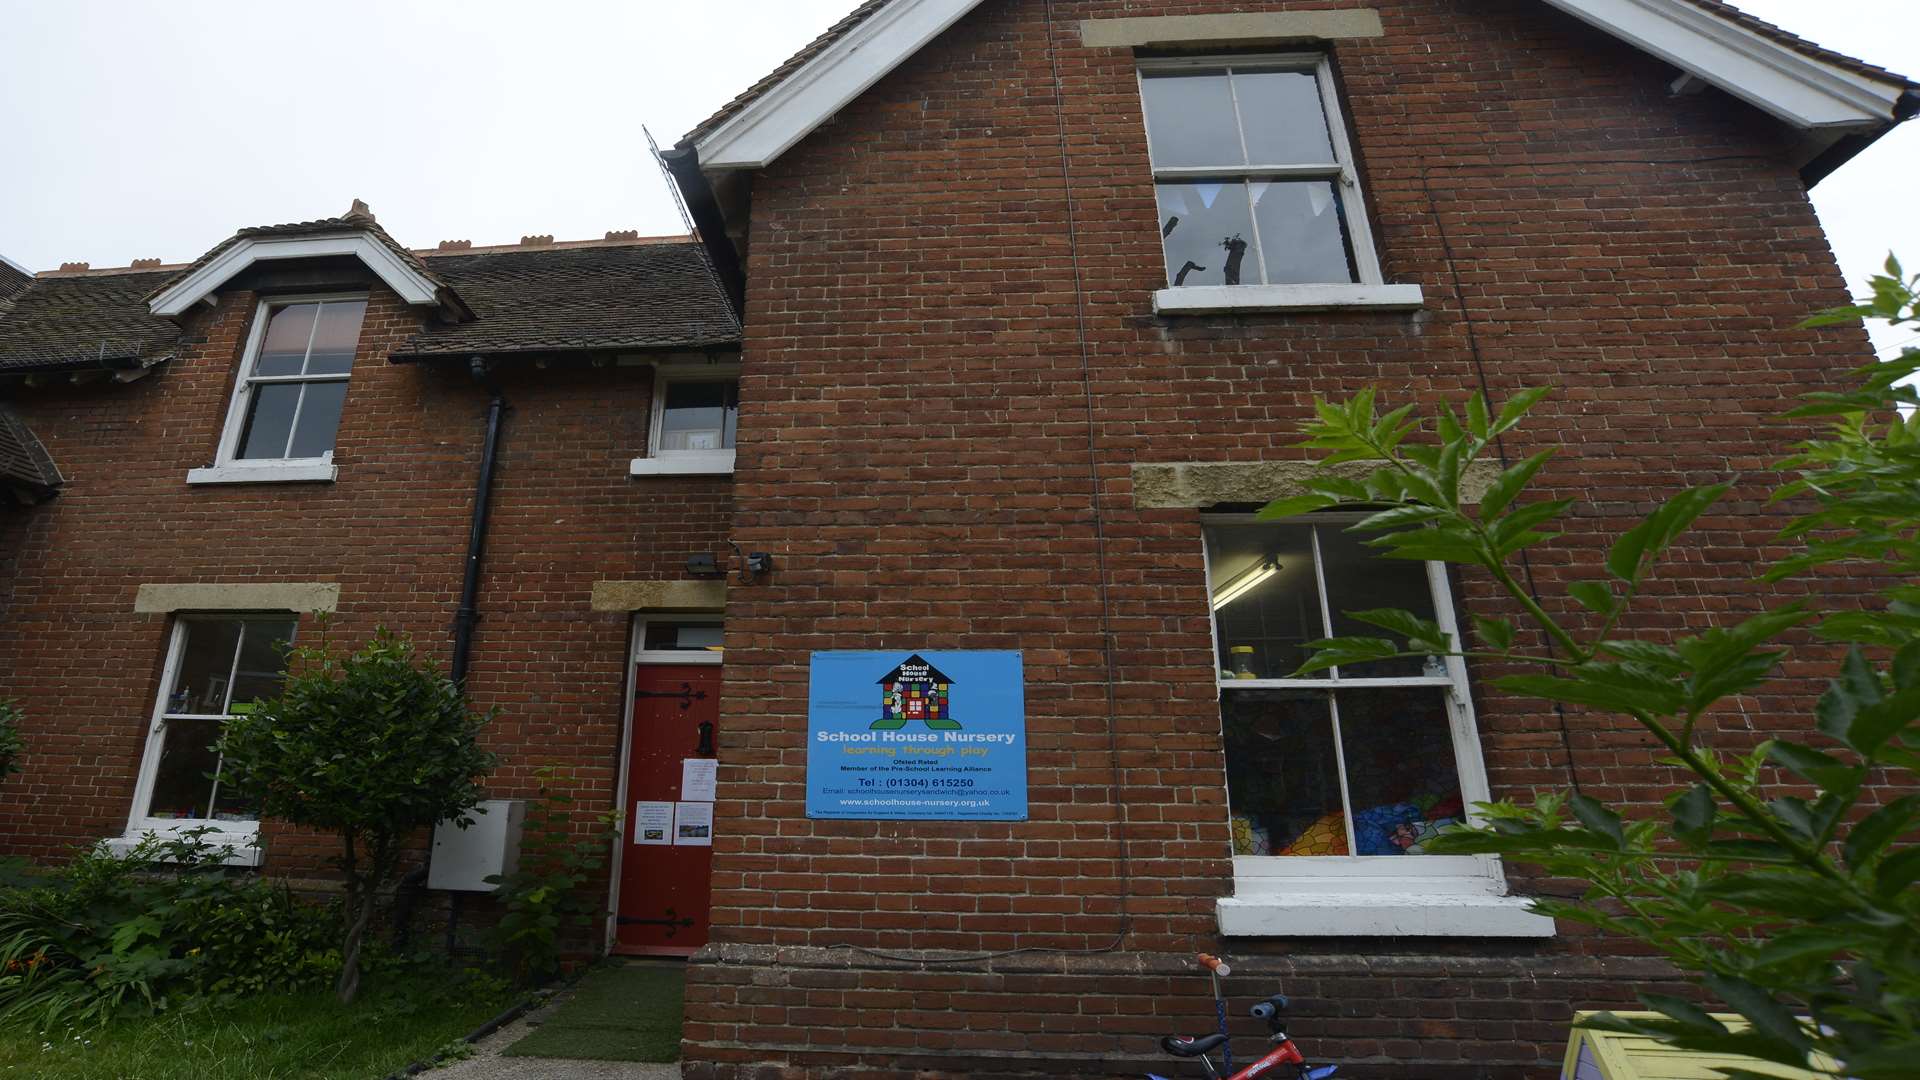 Sandwich's School House Nursery has closed due to financial problems